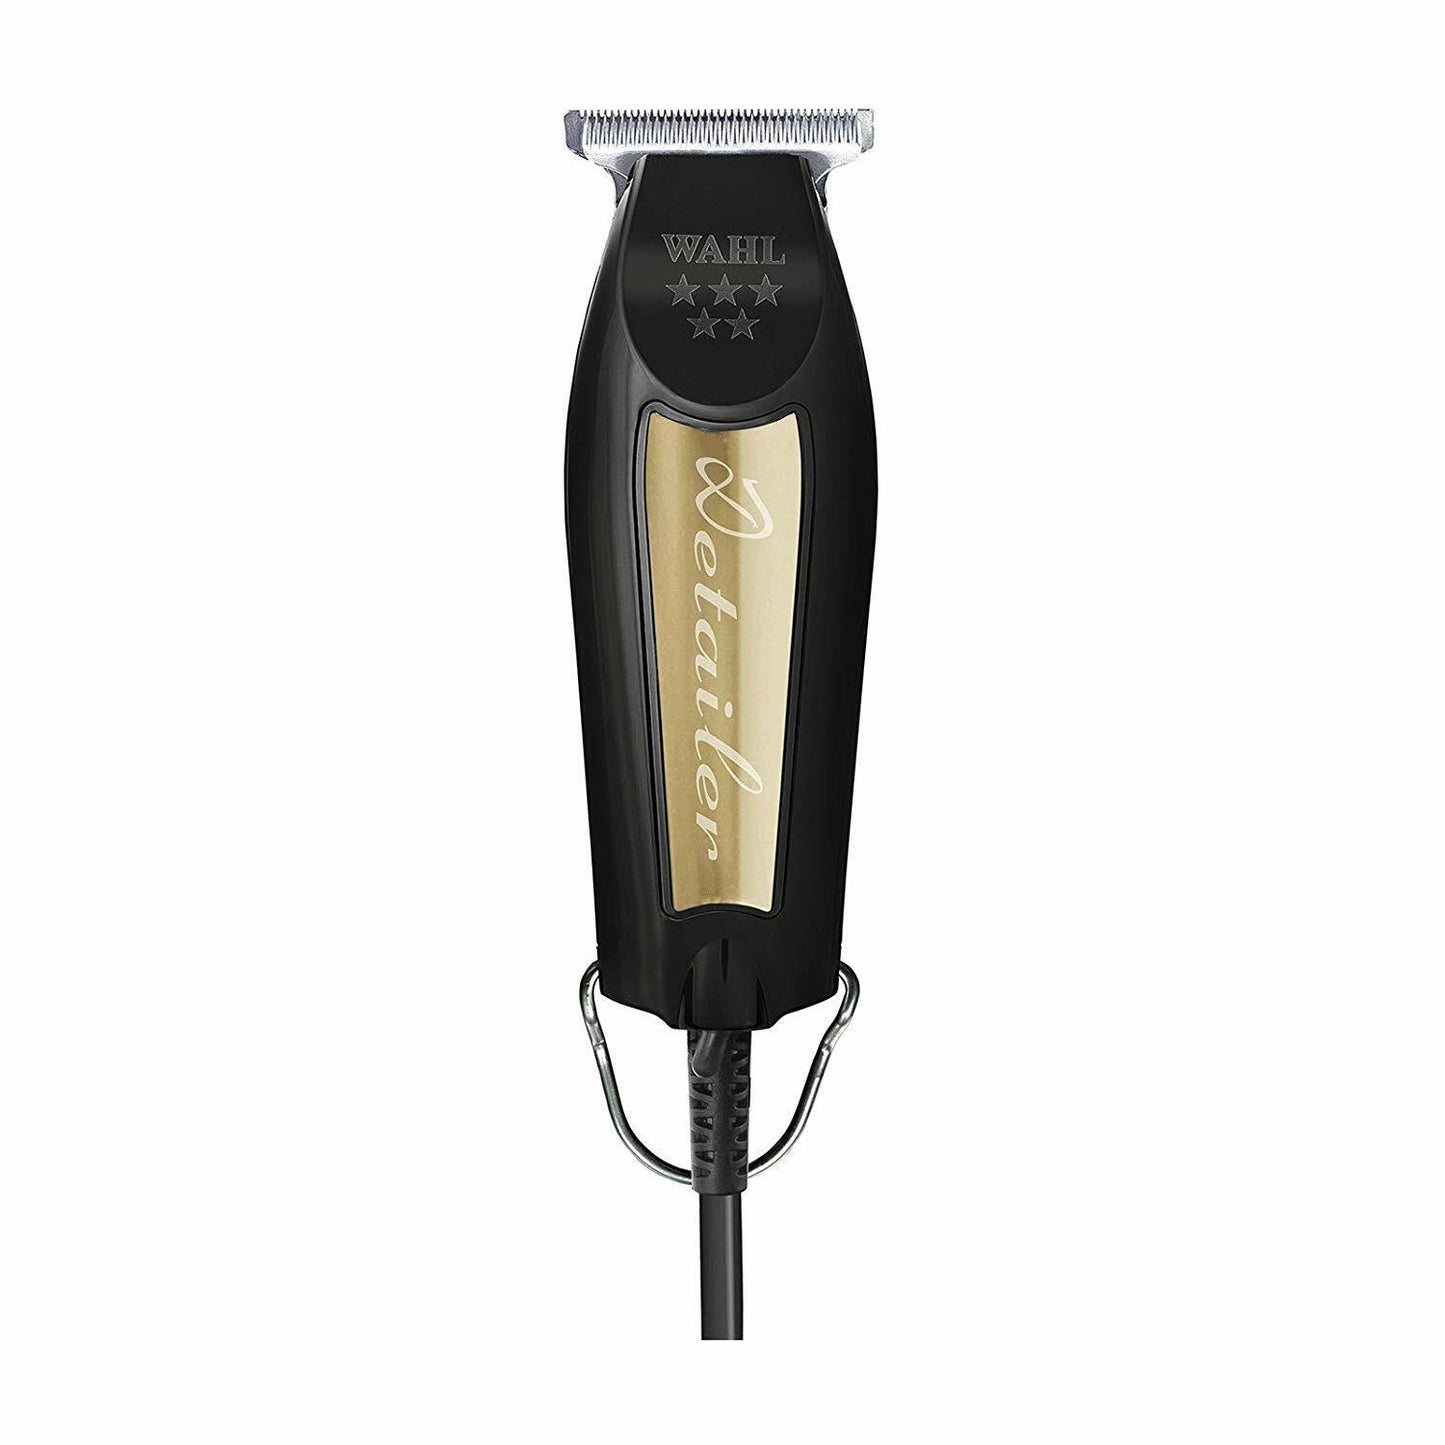 WAHL 5-Star Series Detailer T-Wide GOLD Trimmer (corded)